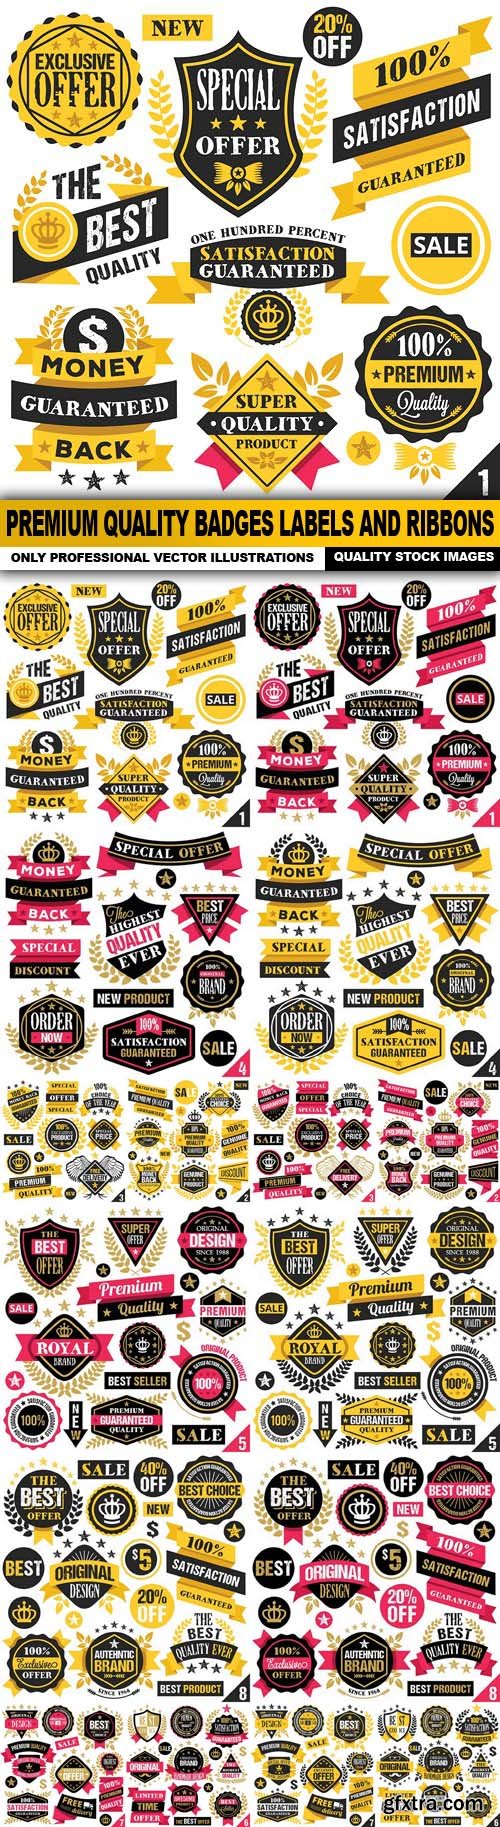 Premium Quality Badges Labels And Ribbons - 16 Vector